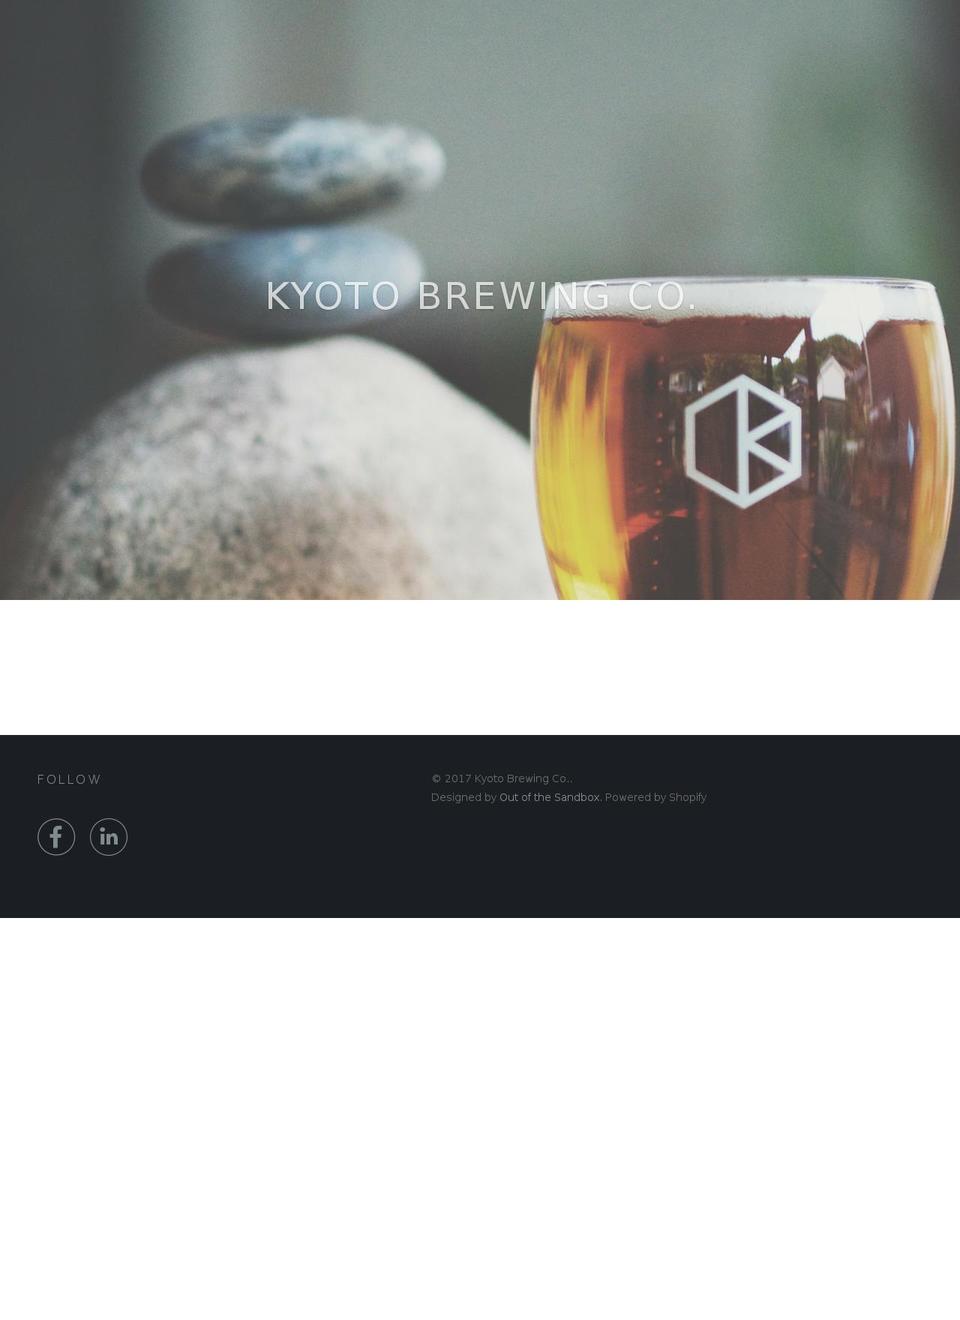 Production Shopify theme site example kyotobrewing.com